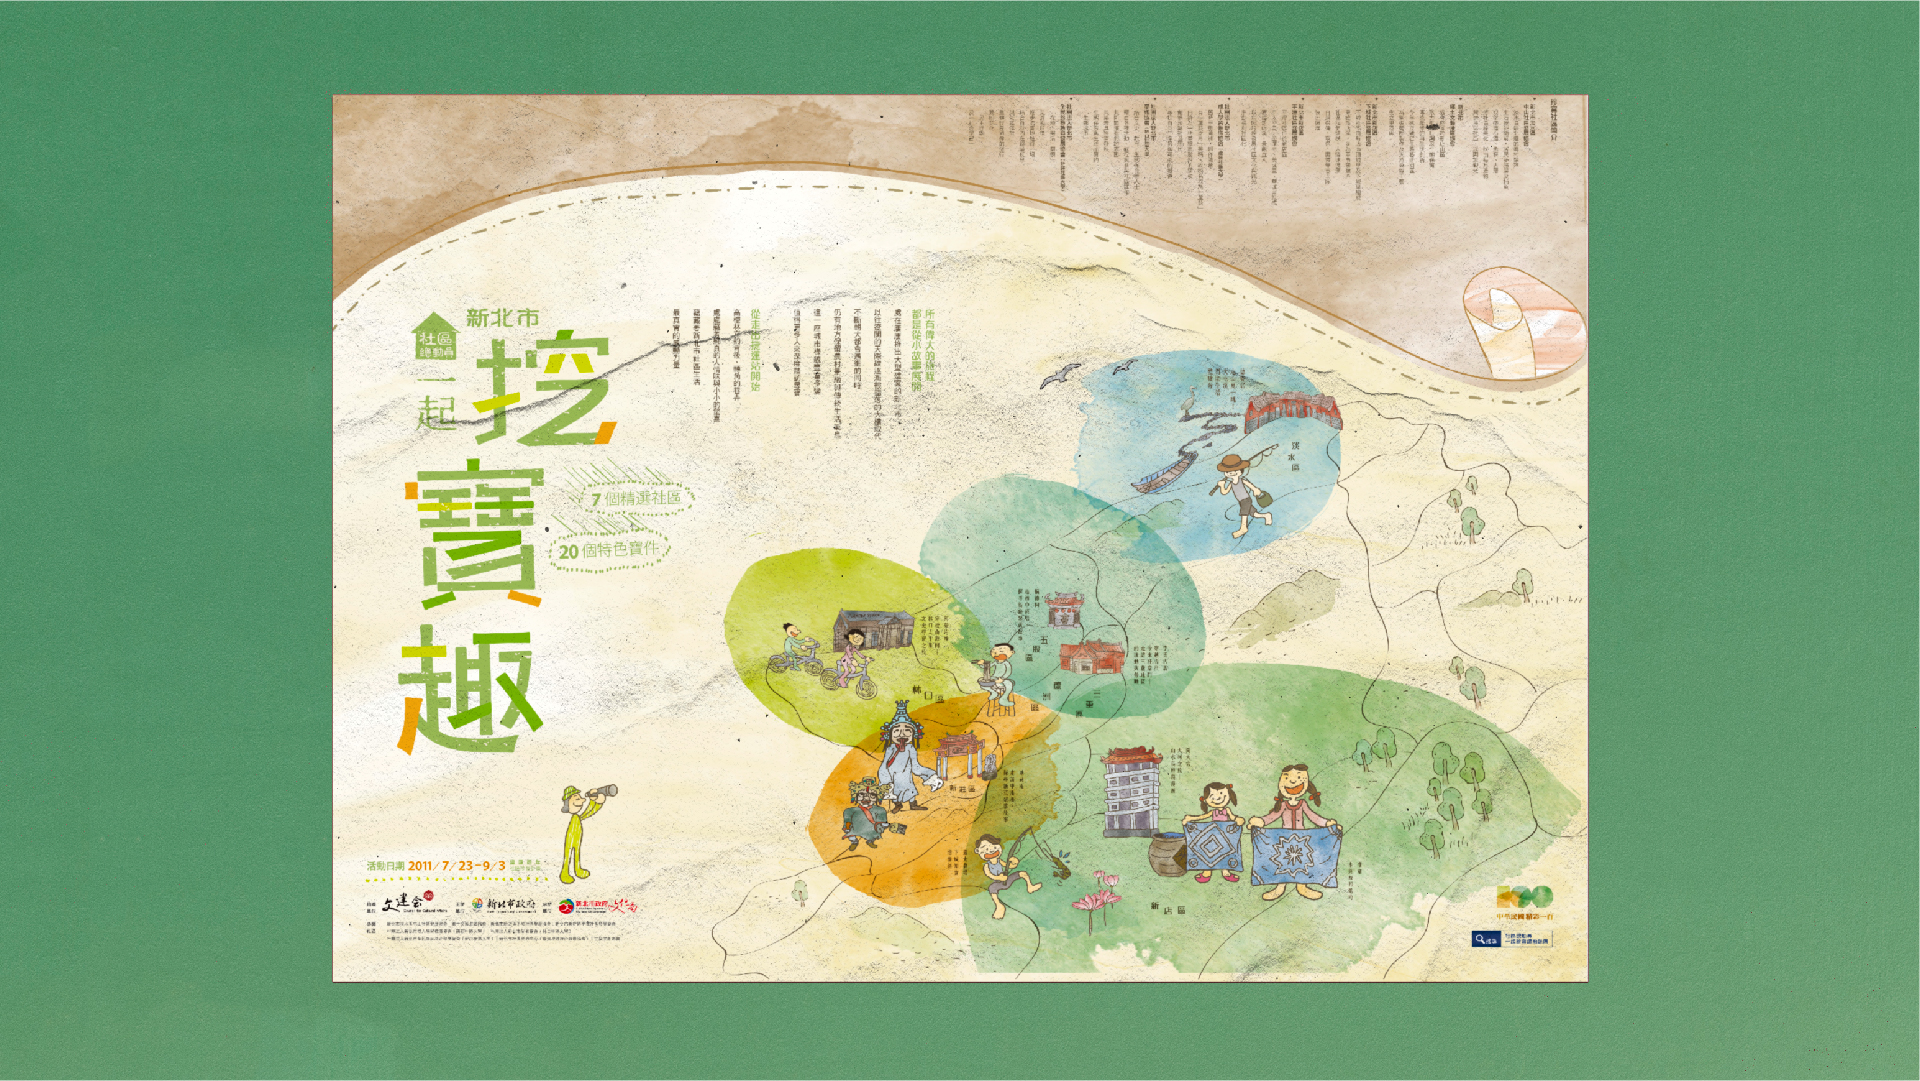 With small stories as the core axis, the travel brochure of the Department of Cultural Affairs, New Taipei City uses illustrations to draw a map of New Taipei City. Each area on the map has hand-drawn illustrations of local features to create connections between the people rapidly.  | Taipei Cultural experience | CAN Culture